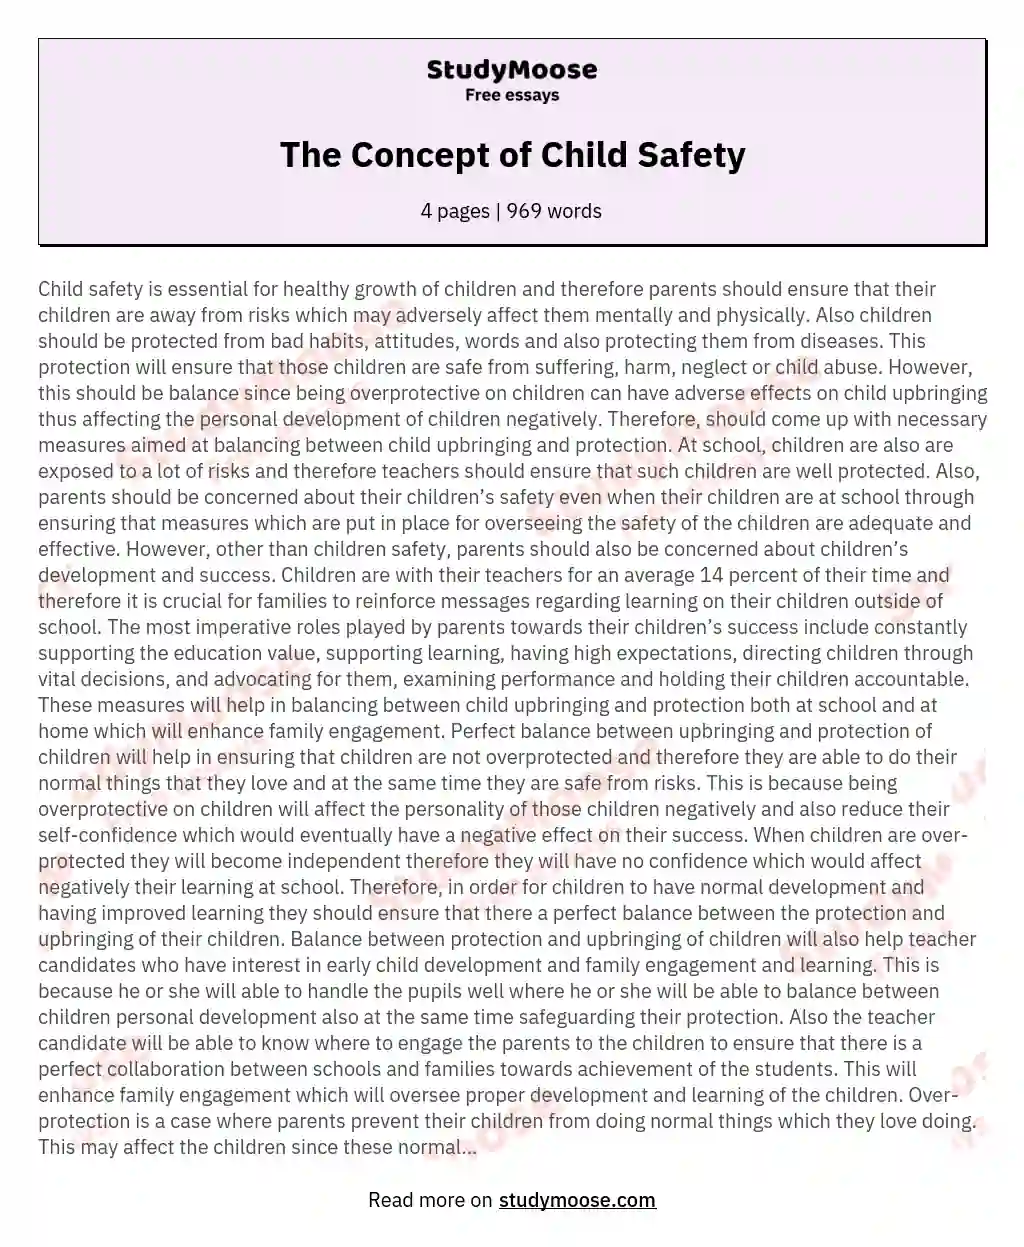 The Concept of Child Safety essay